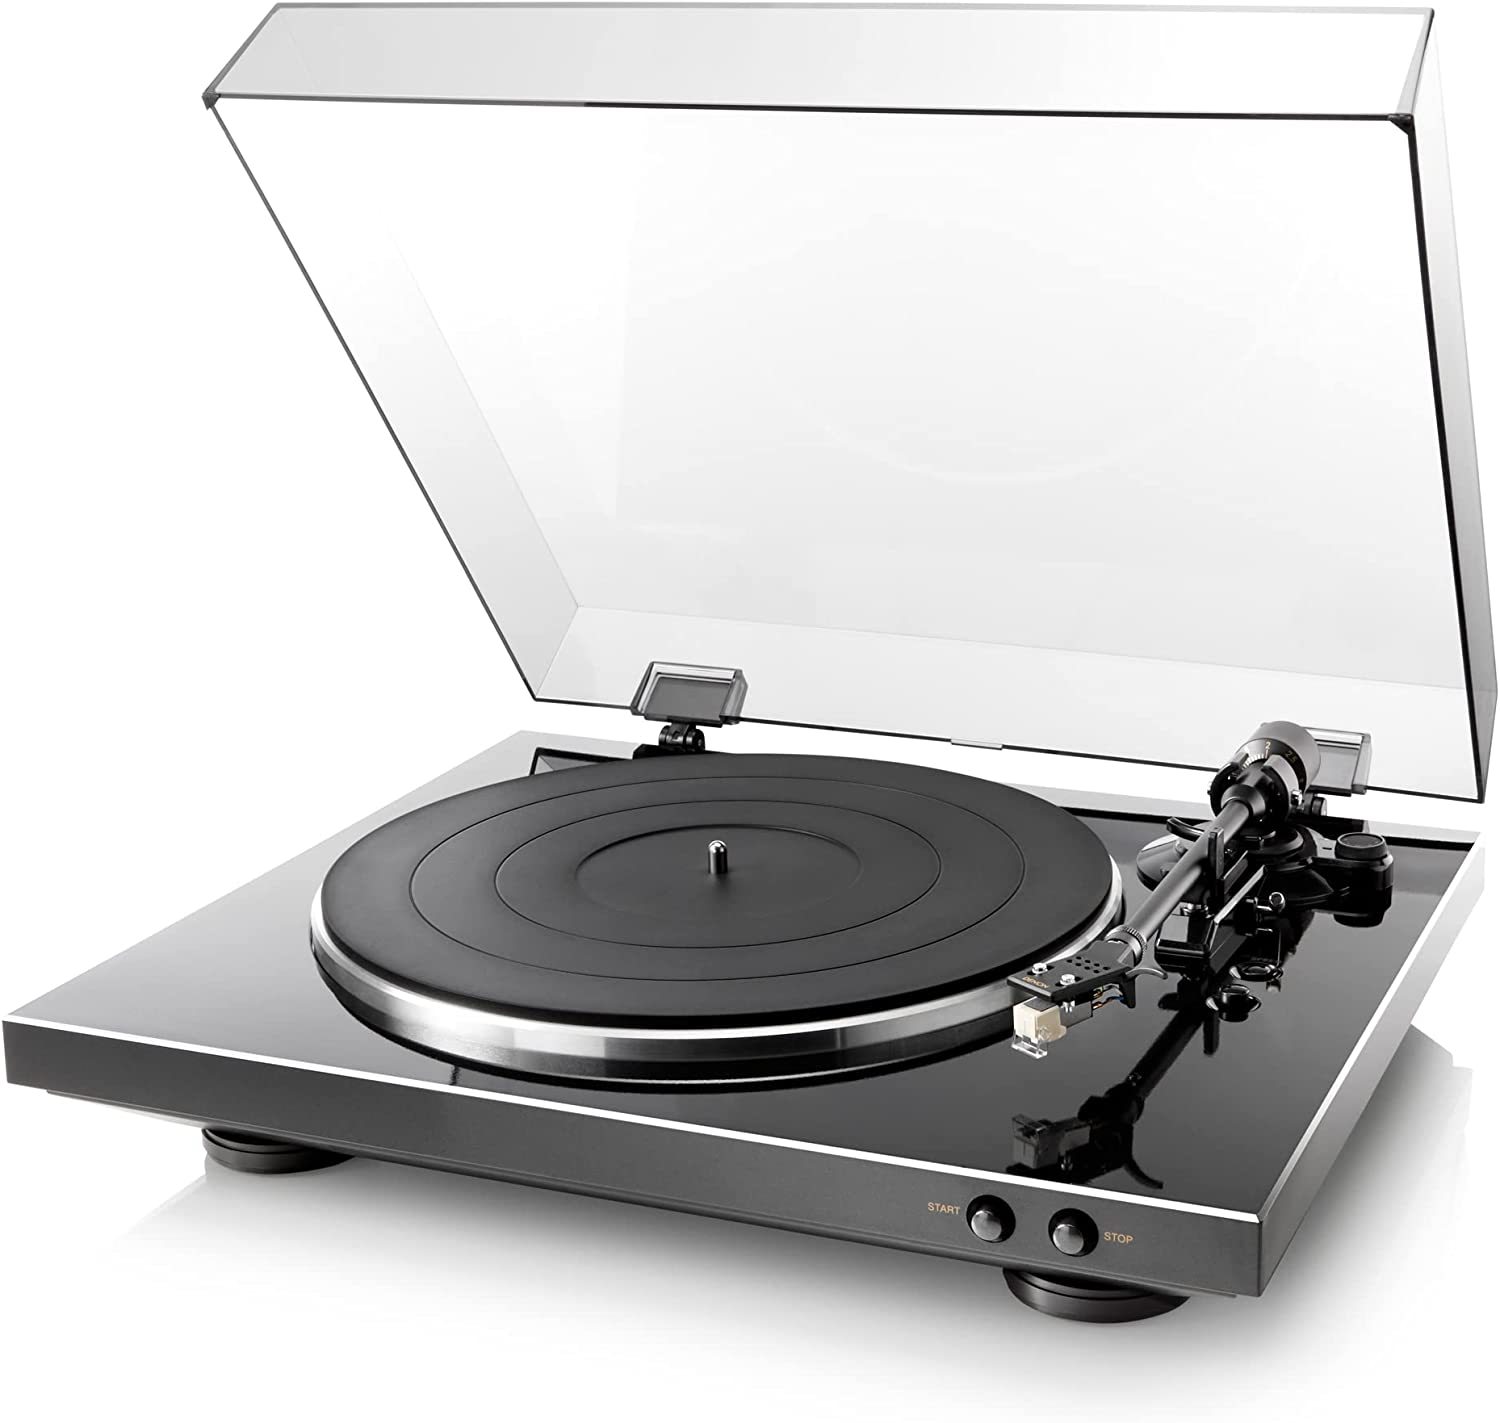 Denon DP-300F Fully Automatic Analog Turntable with Built-in Phono Equalizer | - $557.99